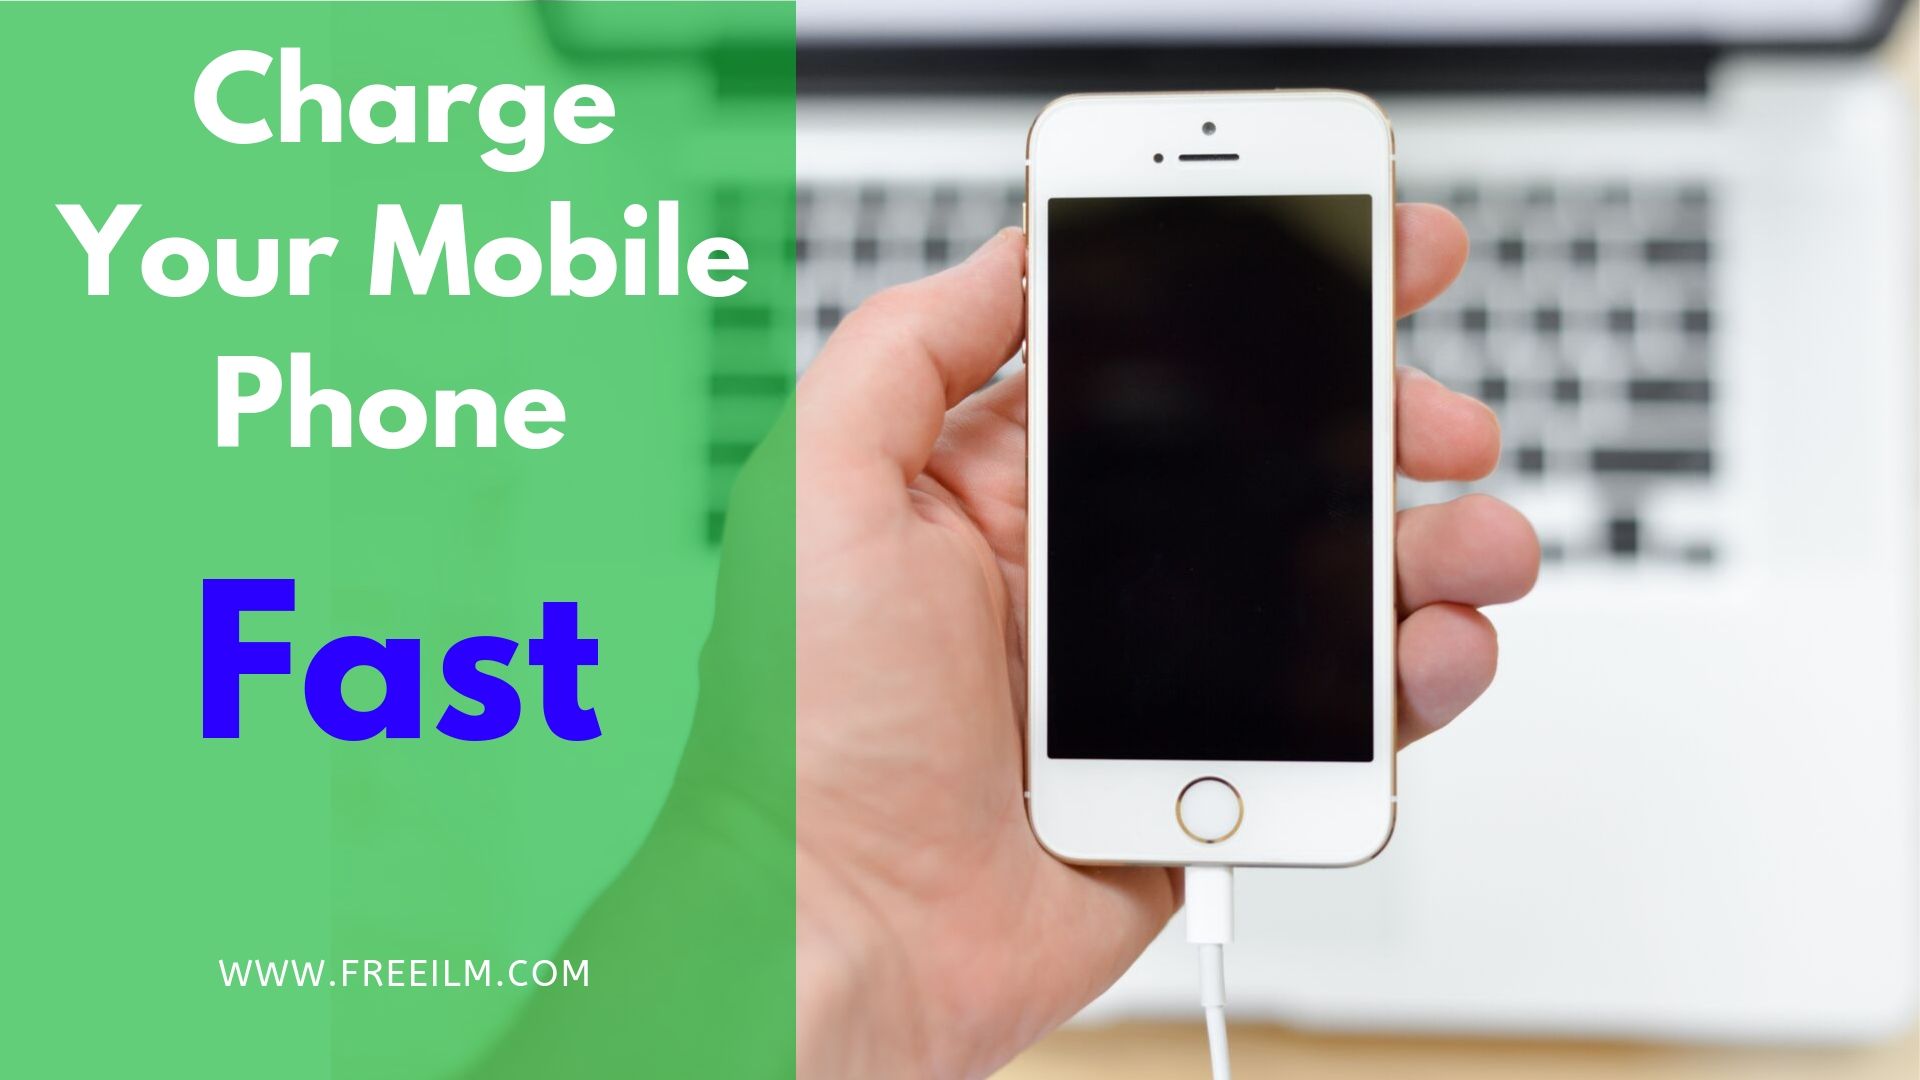 Charge Your Mobile Phone Fast